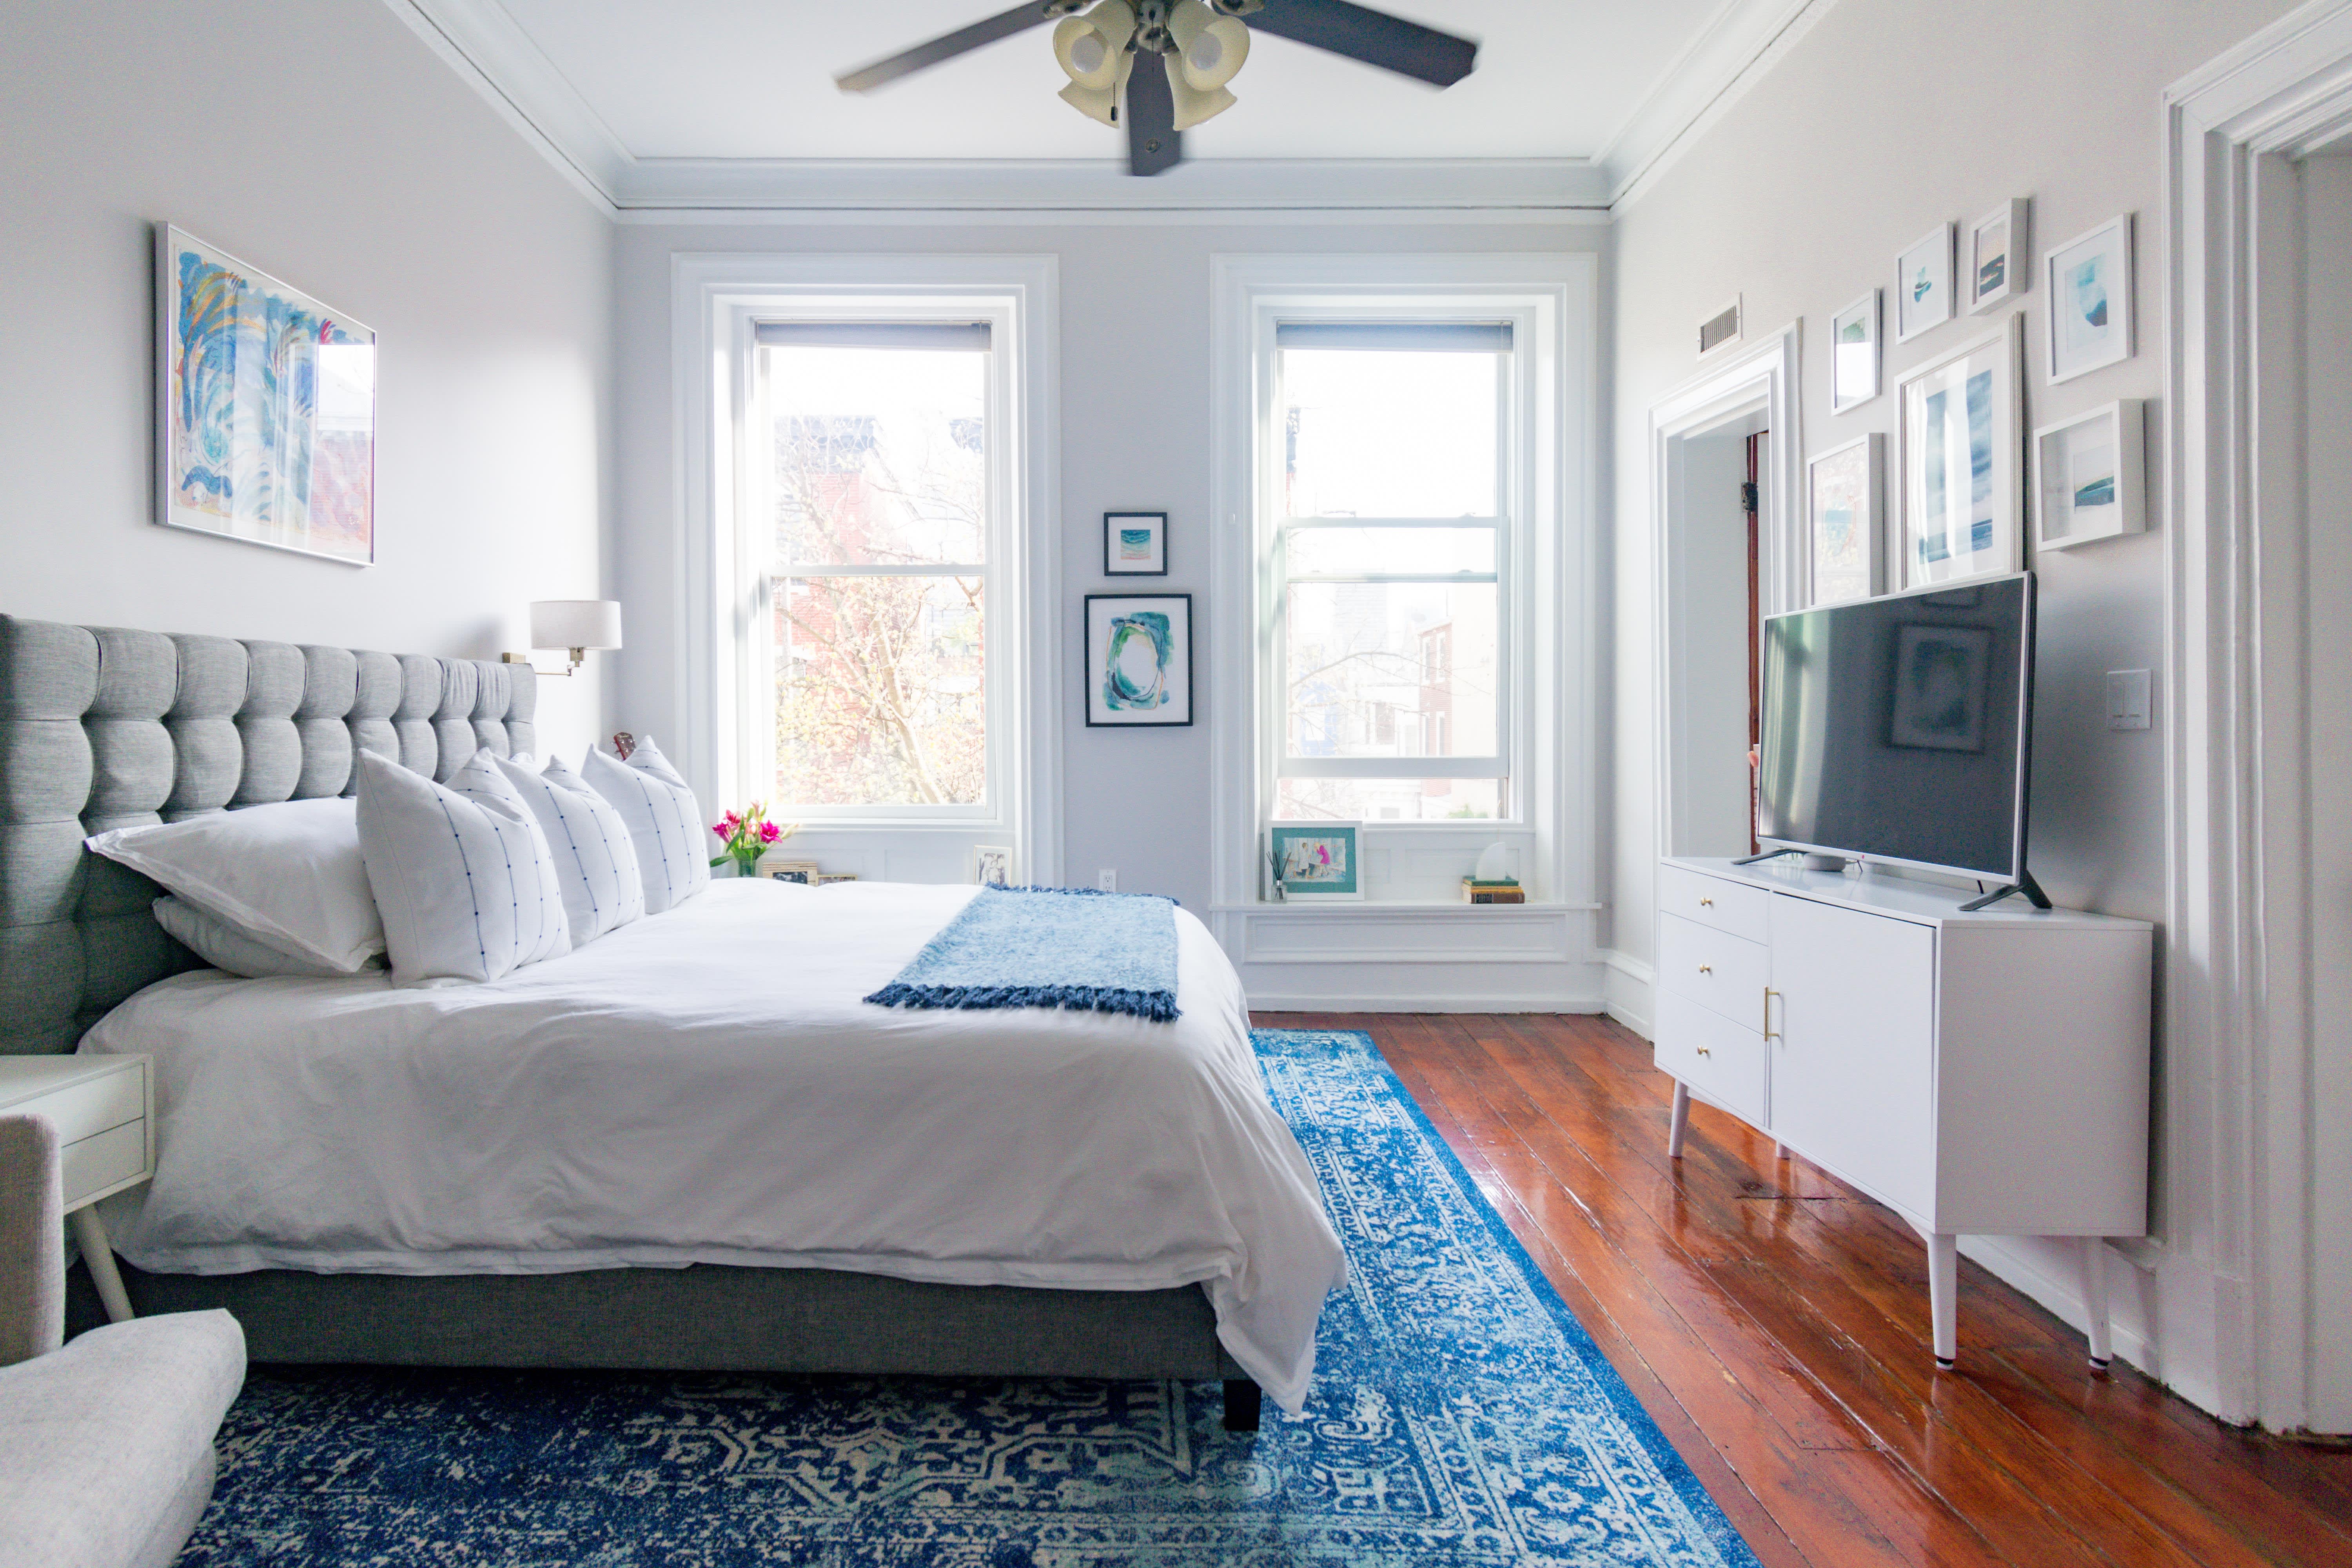 What is the Best Rug Placement in a Bedroom? - My Homier Home